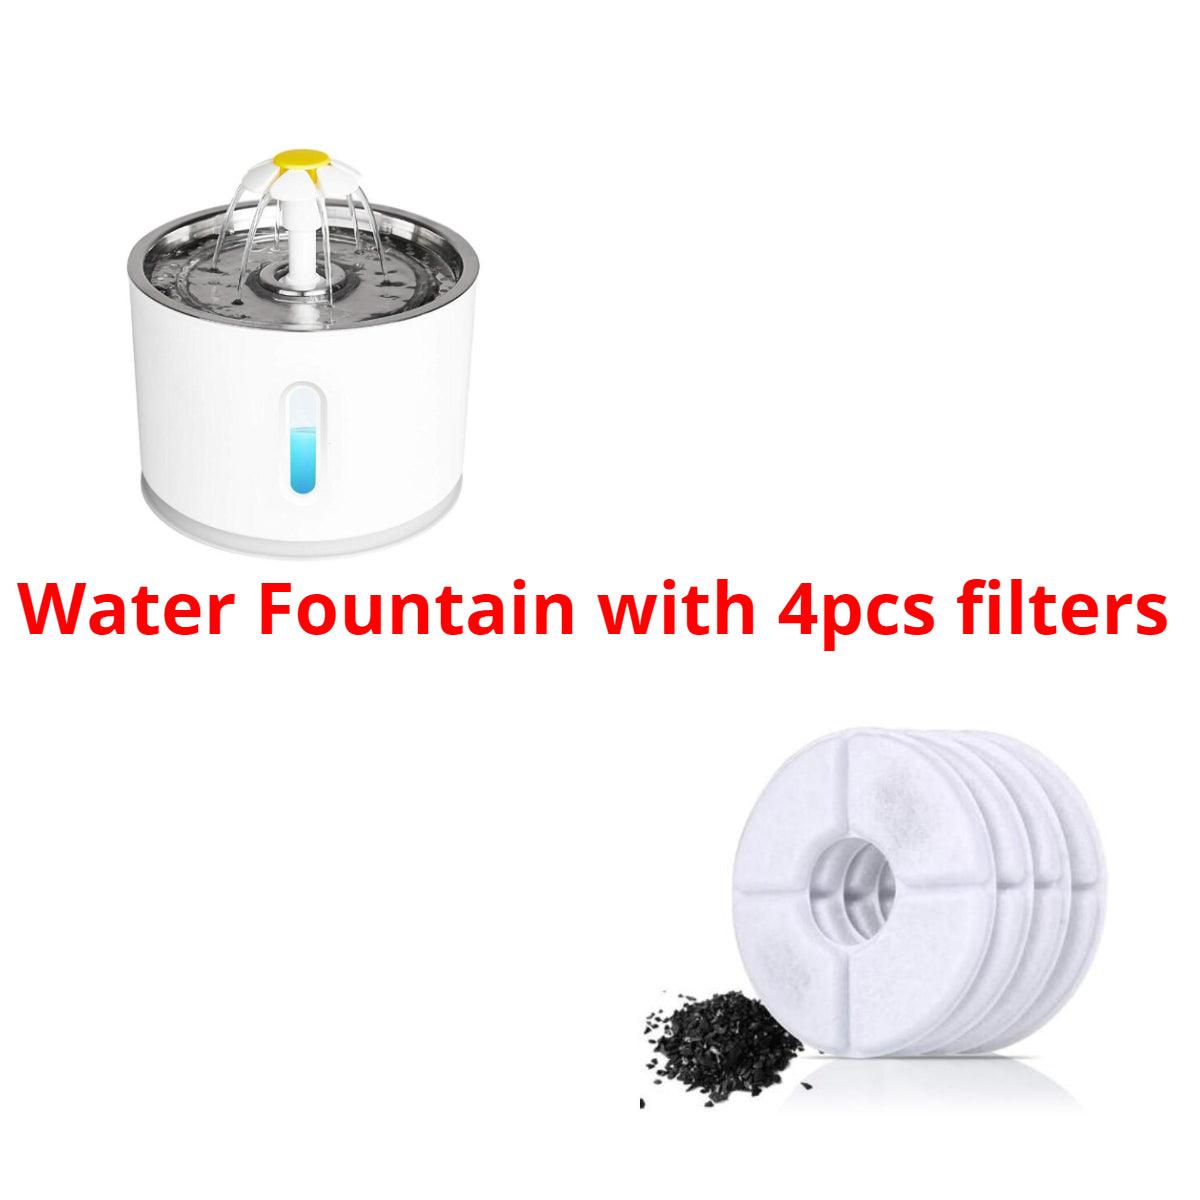 Automatic Pet Cat Water Fountain With Led Lighting Usb Dogs Cats Mute Drinker Feeder Bowl Drinking Dispenser - Dog Hugs Cat